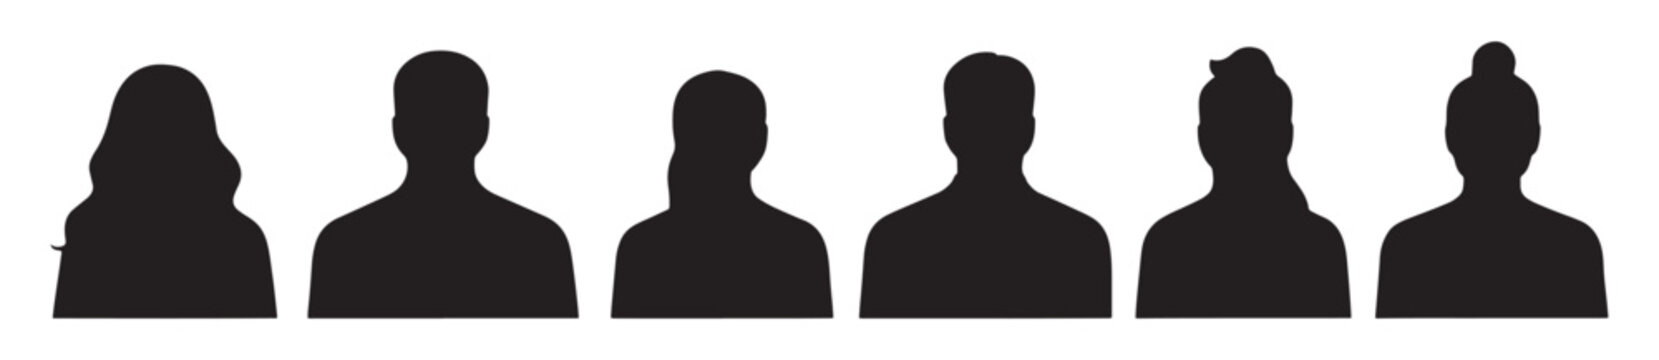 A vector set of silhouette avatar profile icons featuring male and female portrait representations.